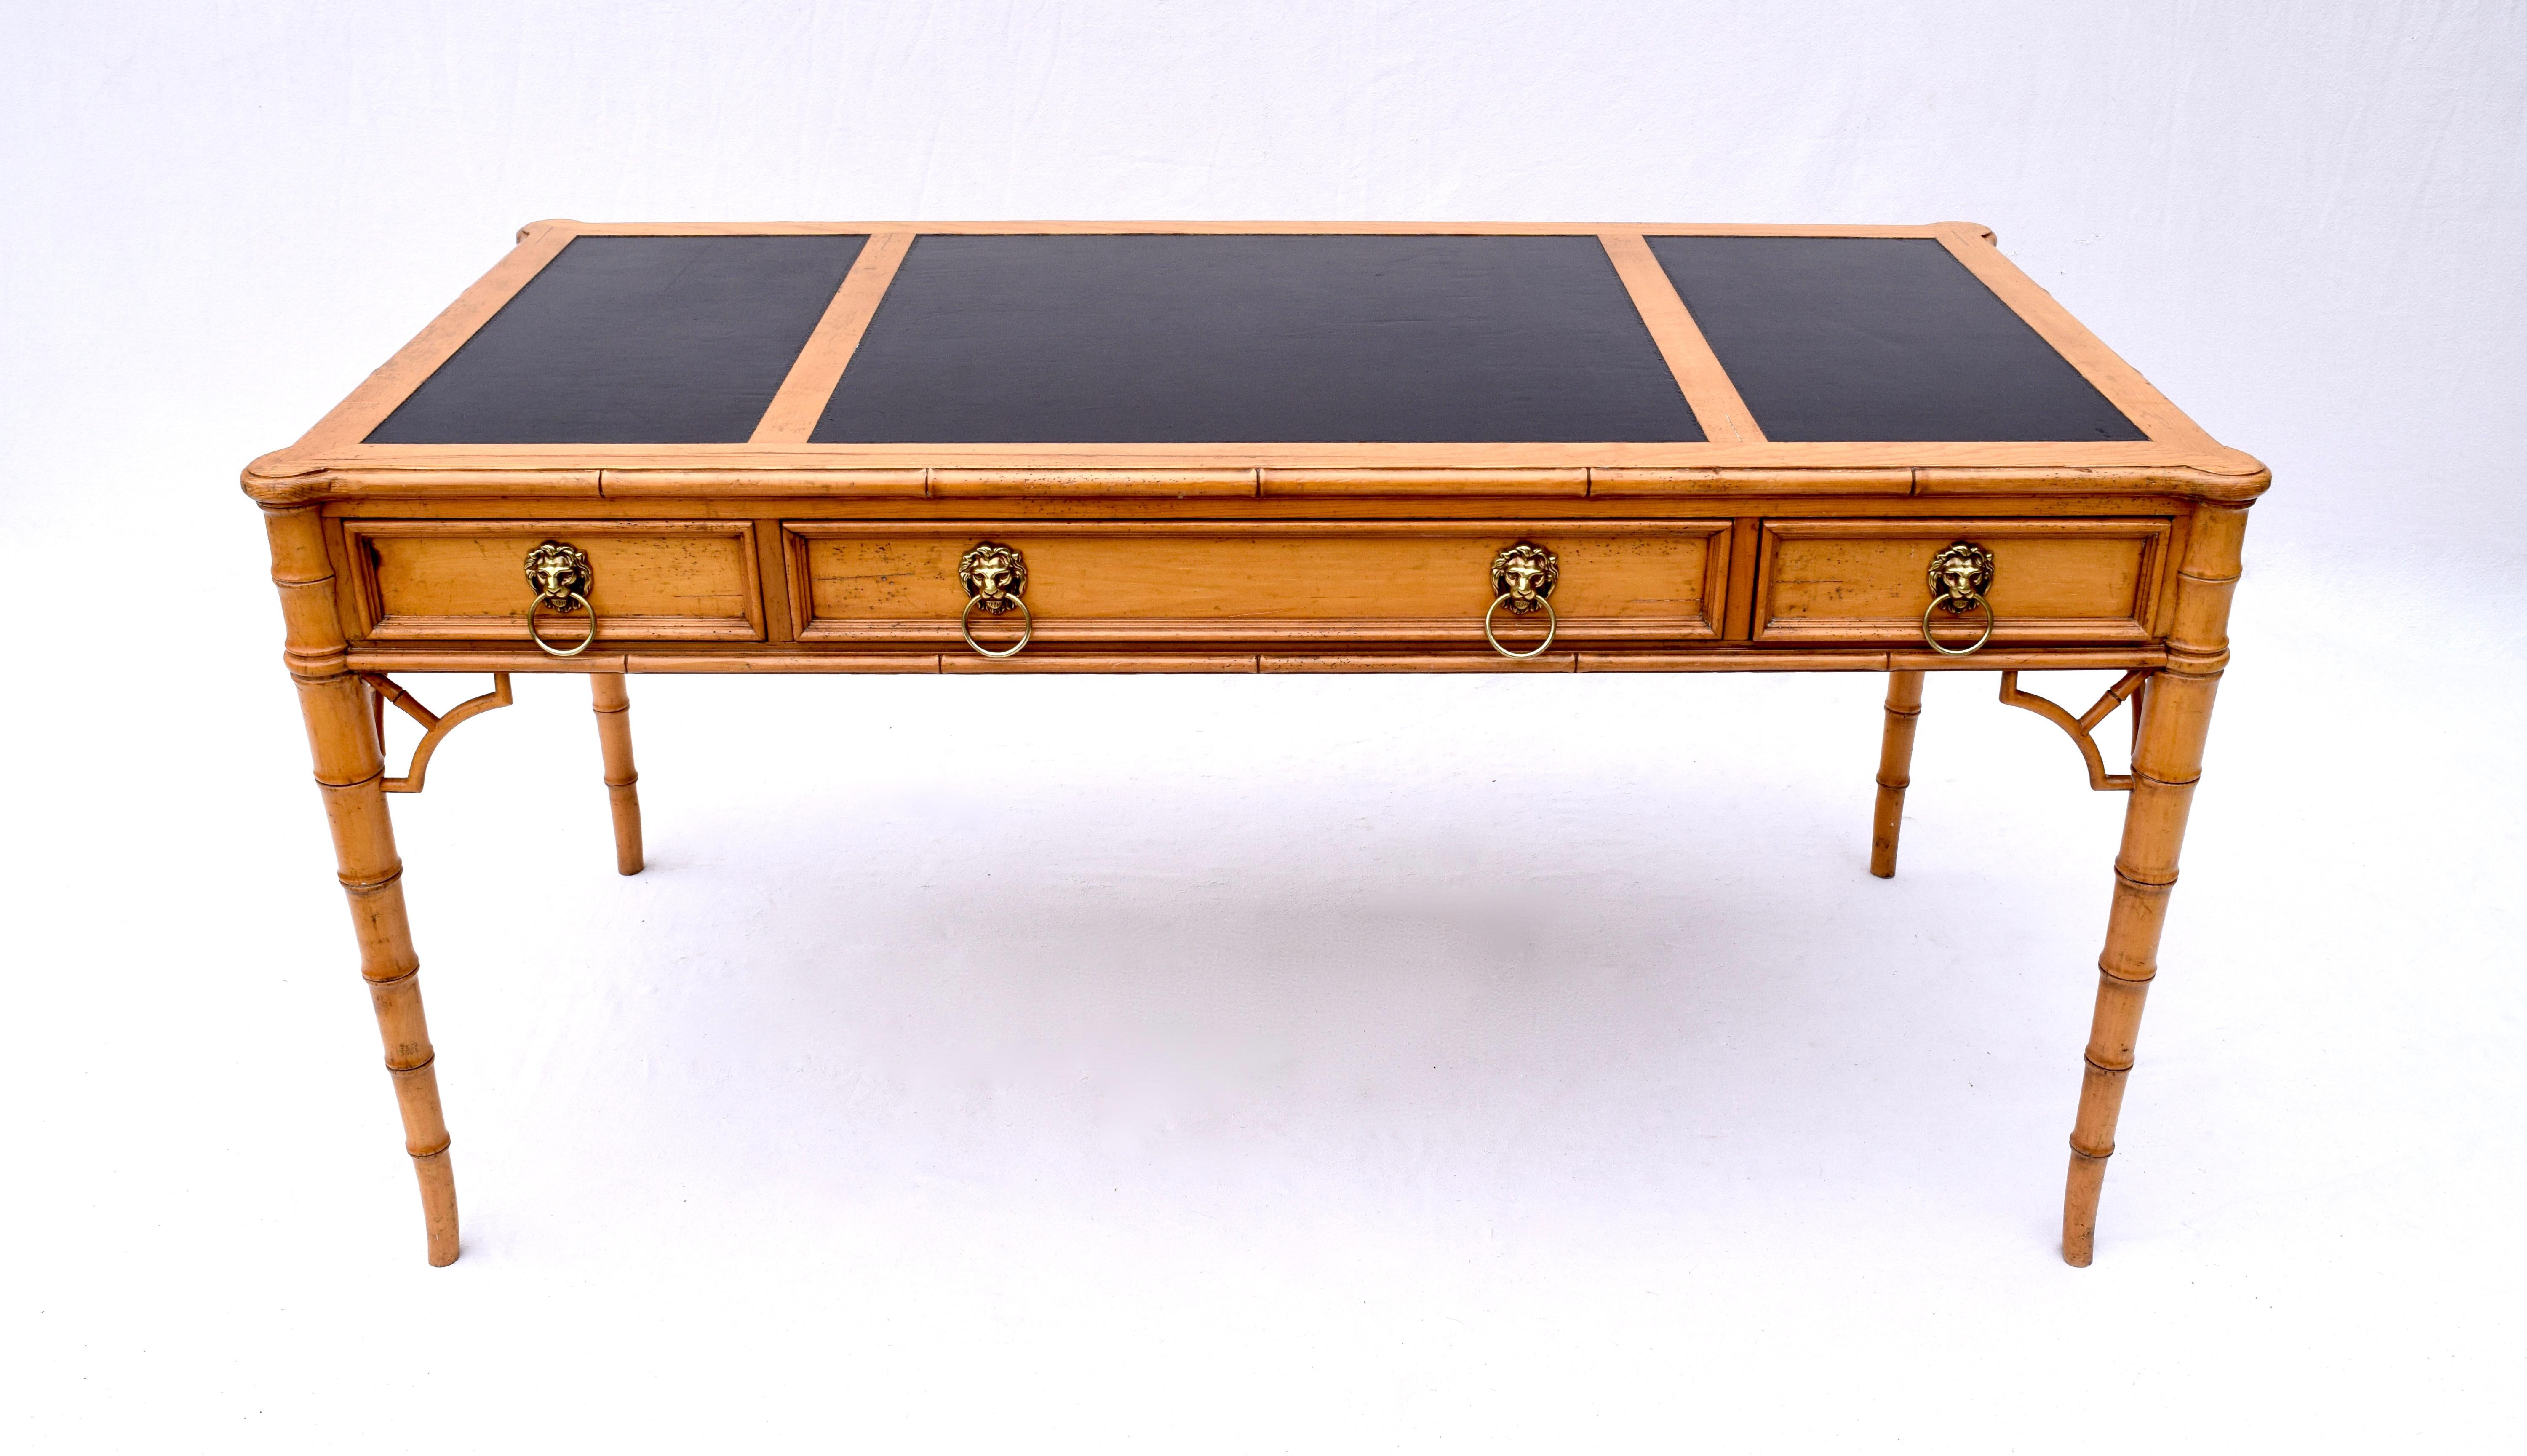 An exceptional Baker Furniture Chippendale & Regency influenced faux bamboo desk featuring three dovetailed drawers, brass lion head pulls and mock drawers on the opposite side. Patinated solid pine construction with tooled leather & scalloped